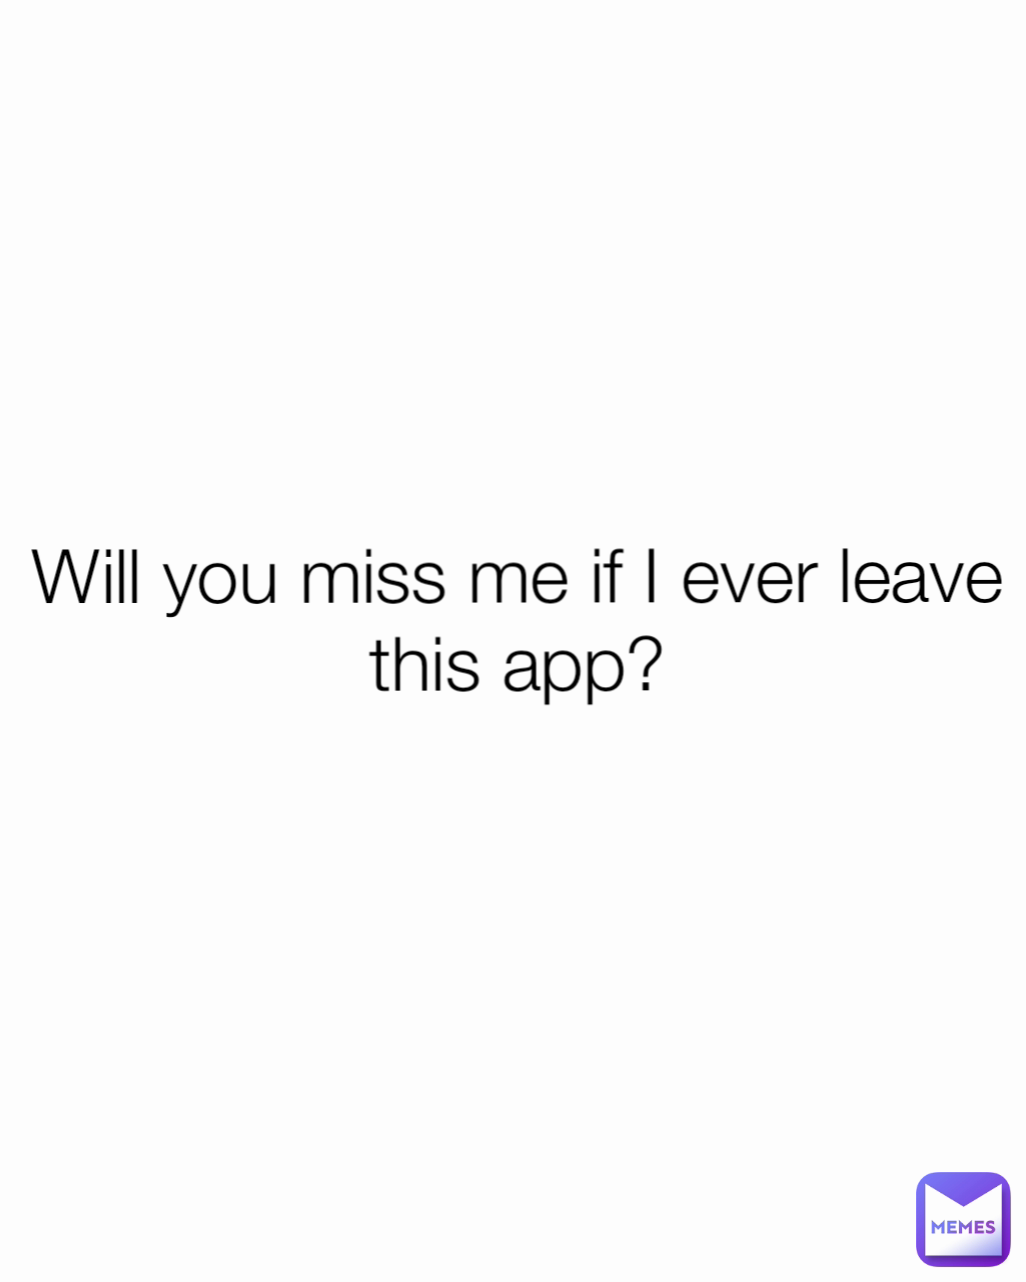 . Will you miss me if I ever leave this app?